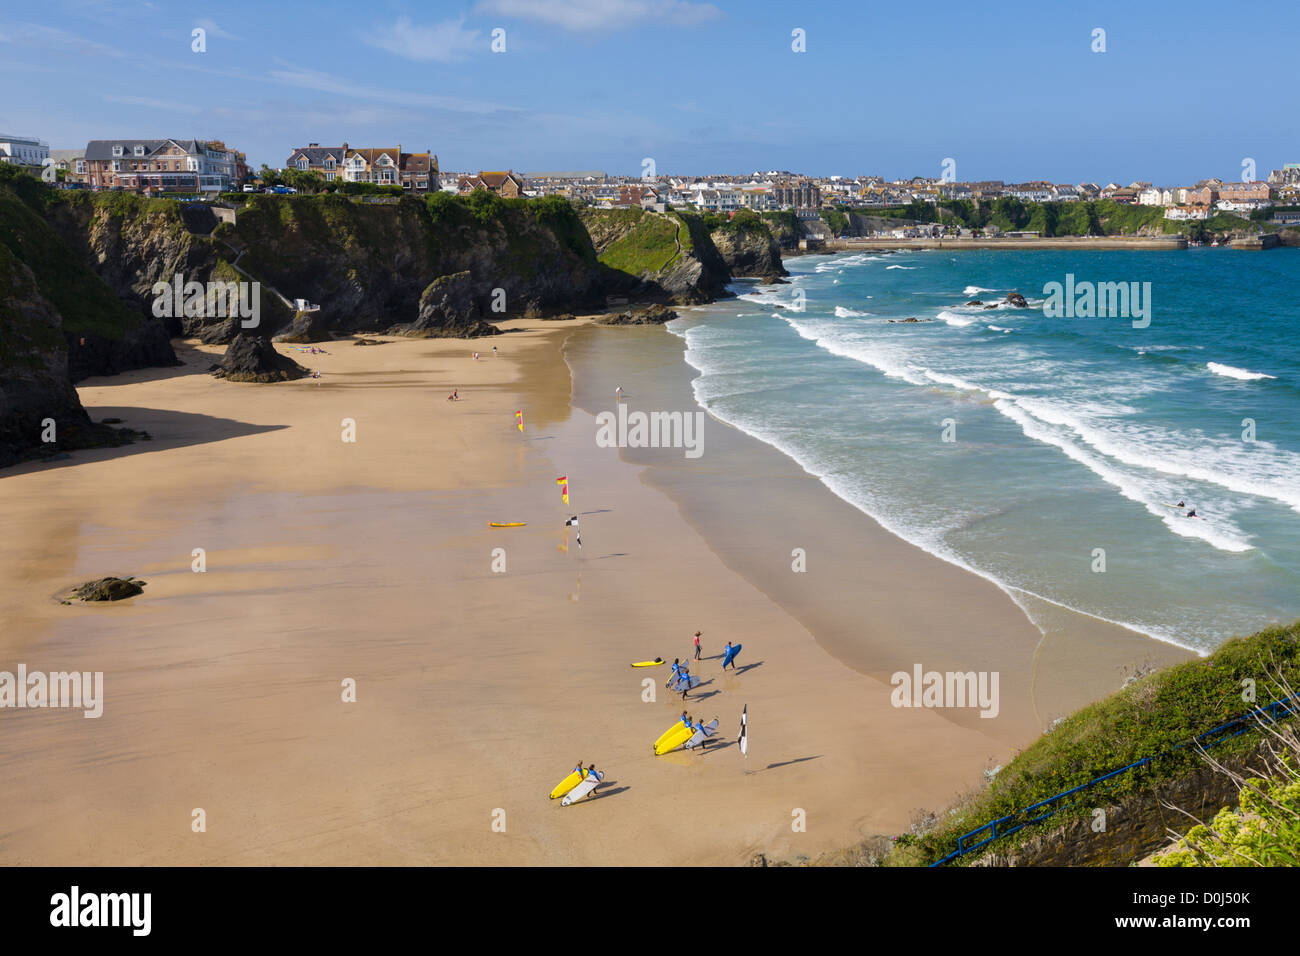 Surfers on beach at Great Western beach, Newquay, Cornwall, England Stock Photo